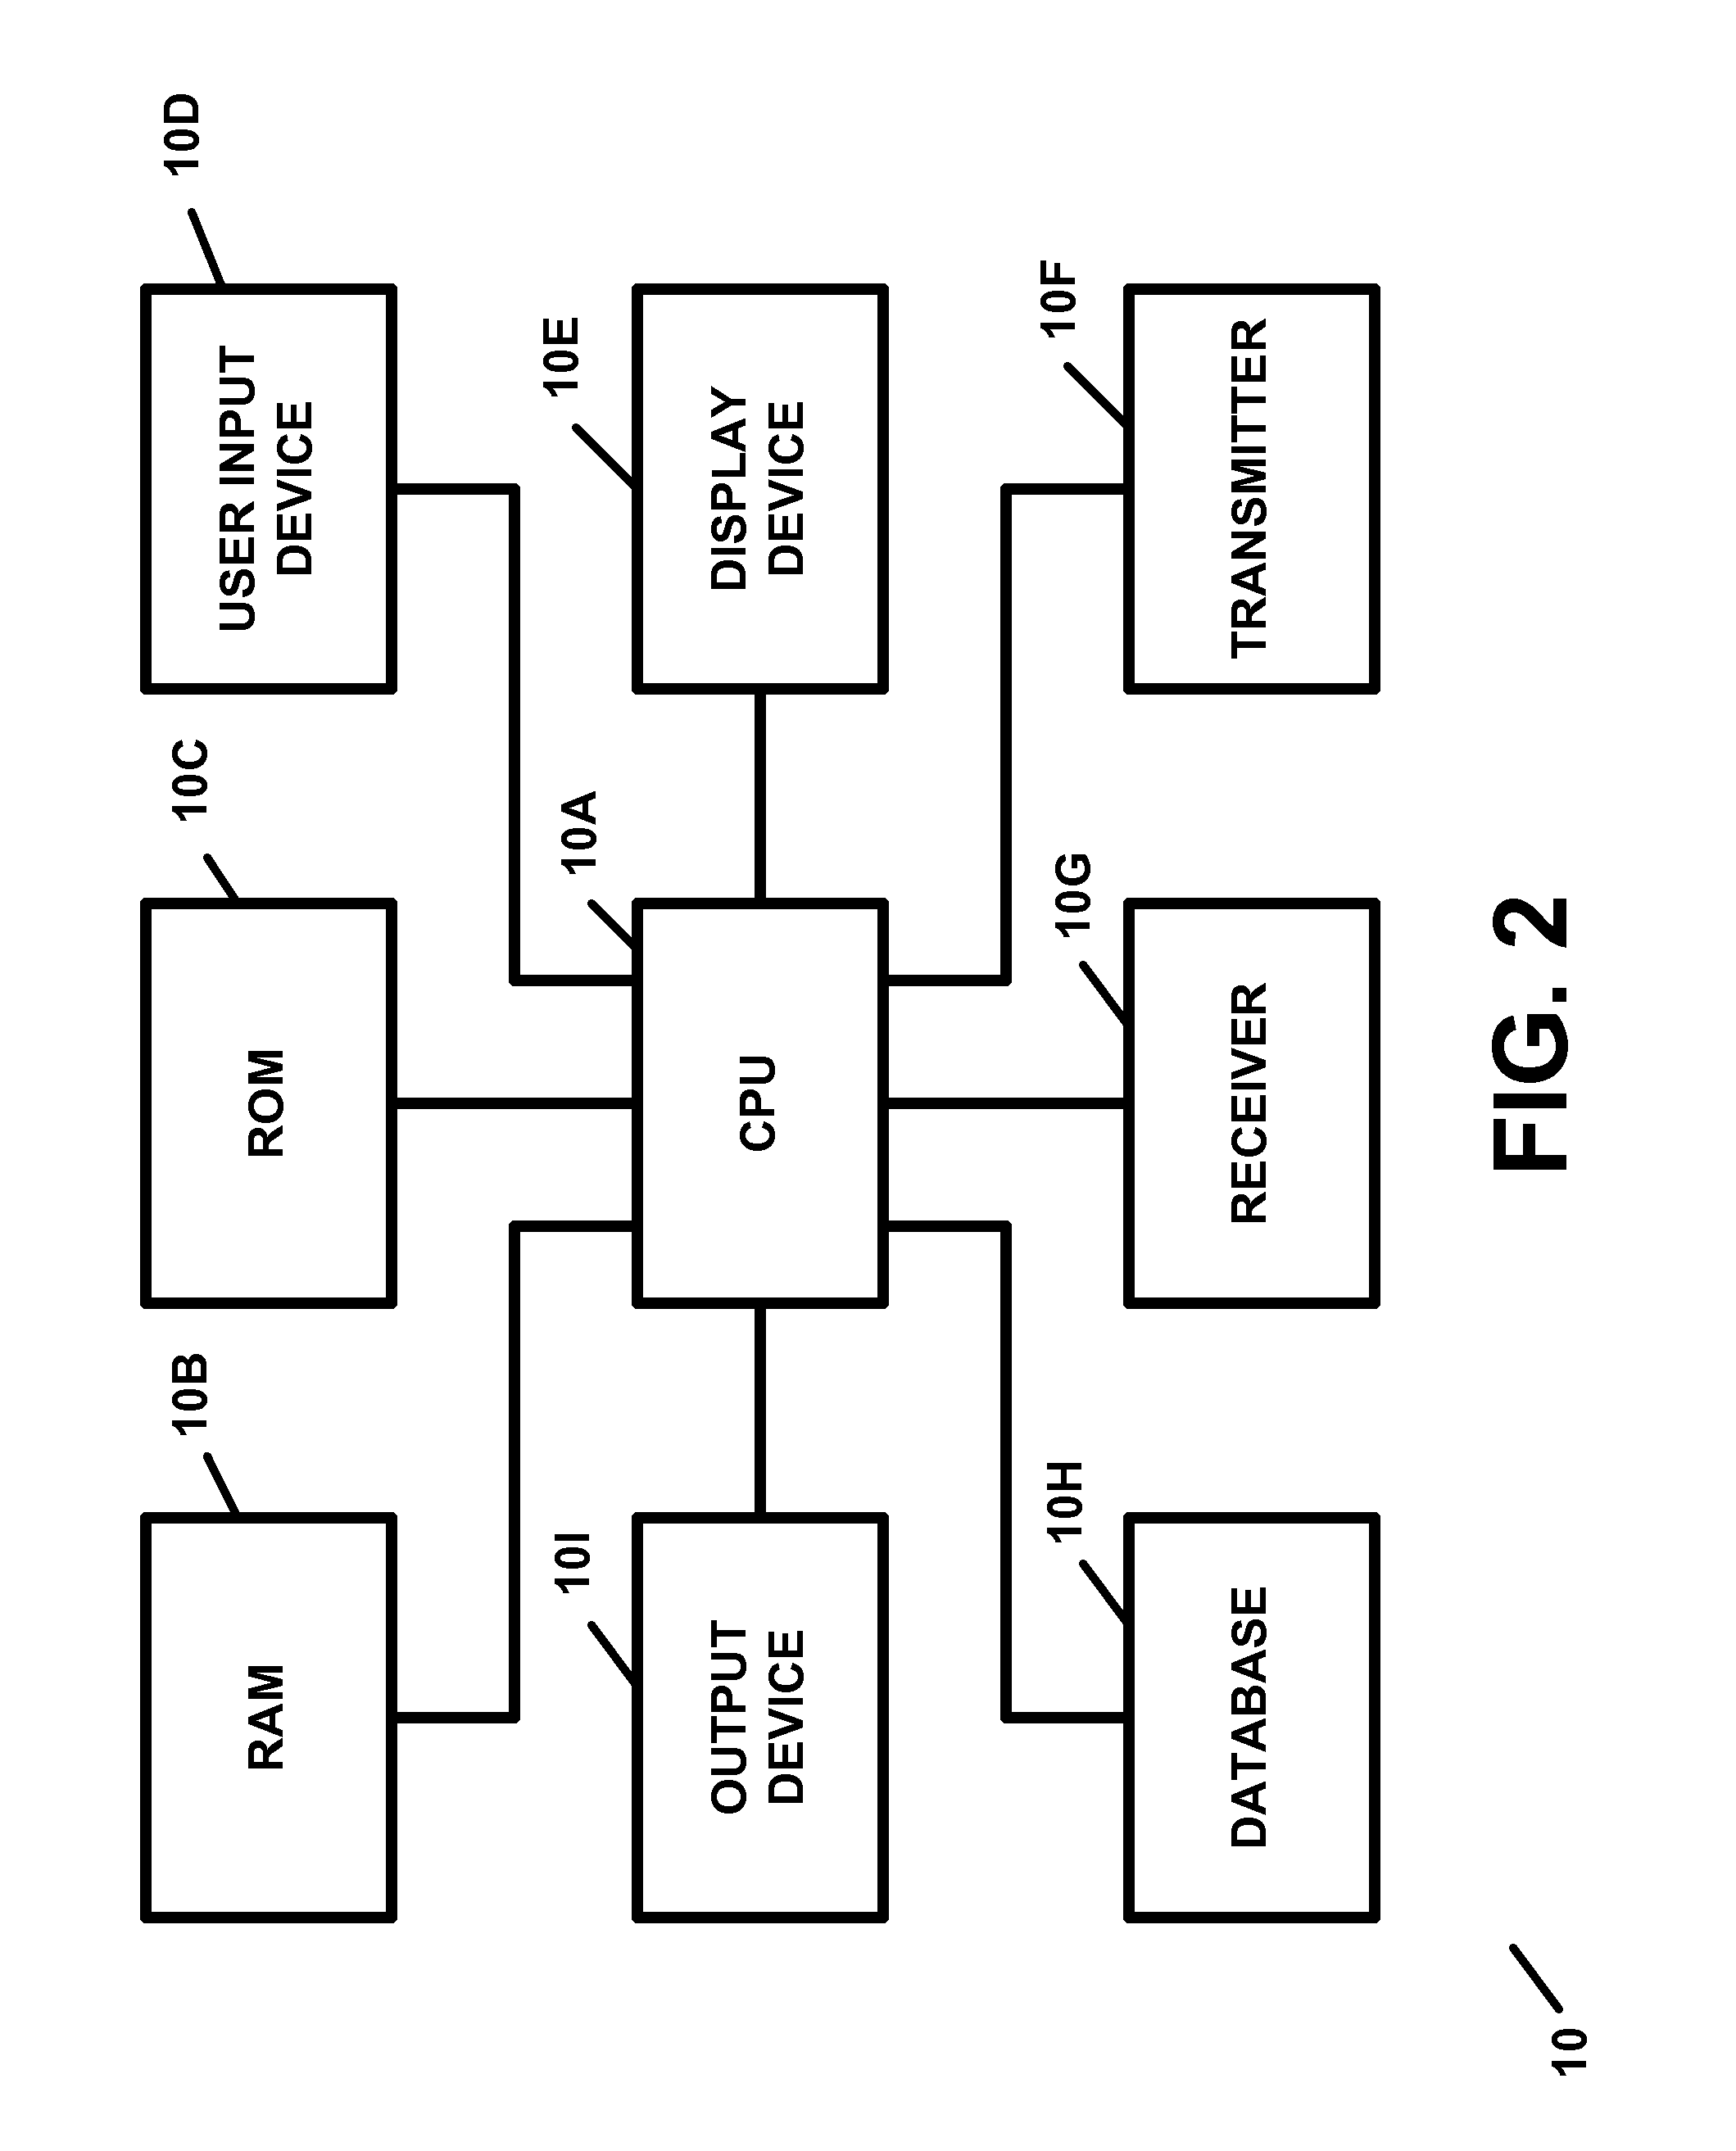 Apparatus and method for processing and/or for providing healthcare information and/or healthcare-related information with or using an electronic healthcare record and genetic information and/or genetic-related information